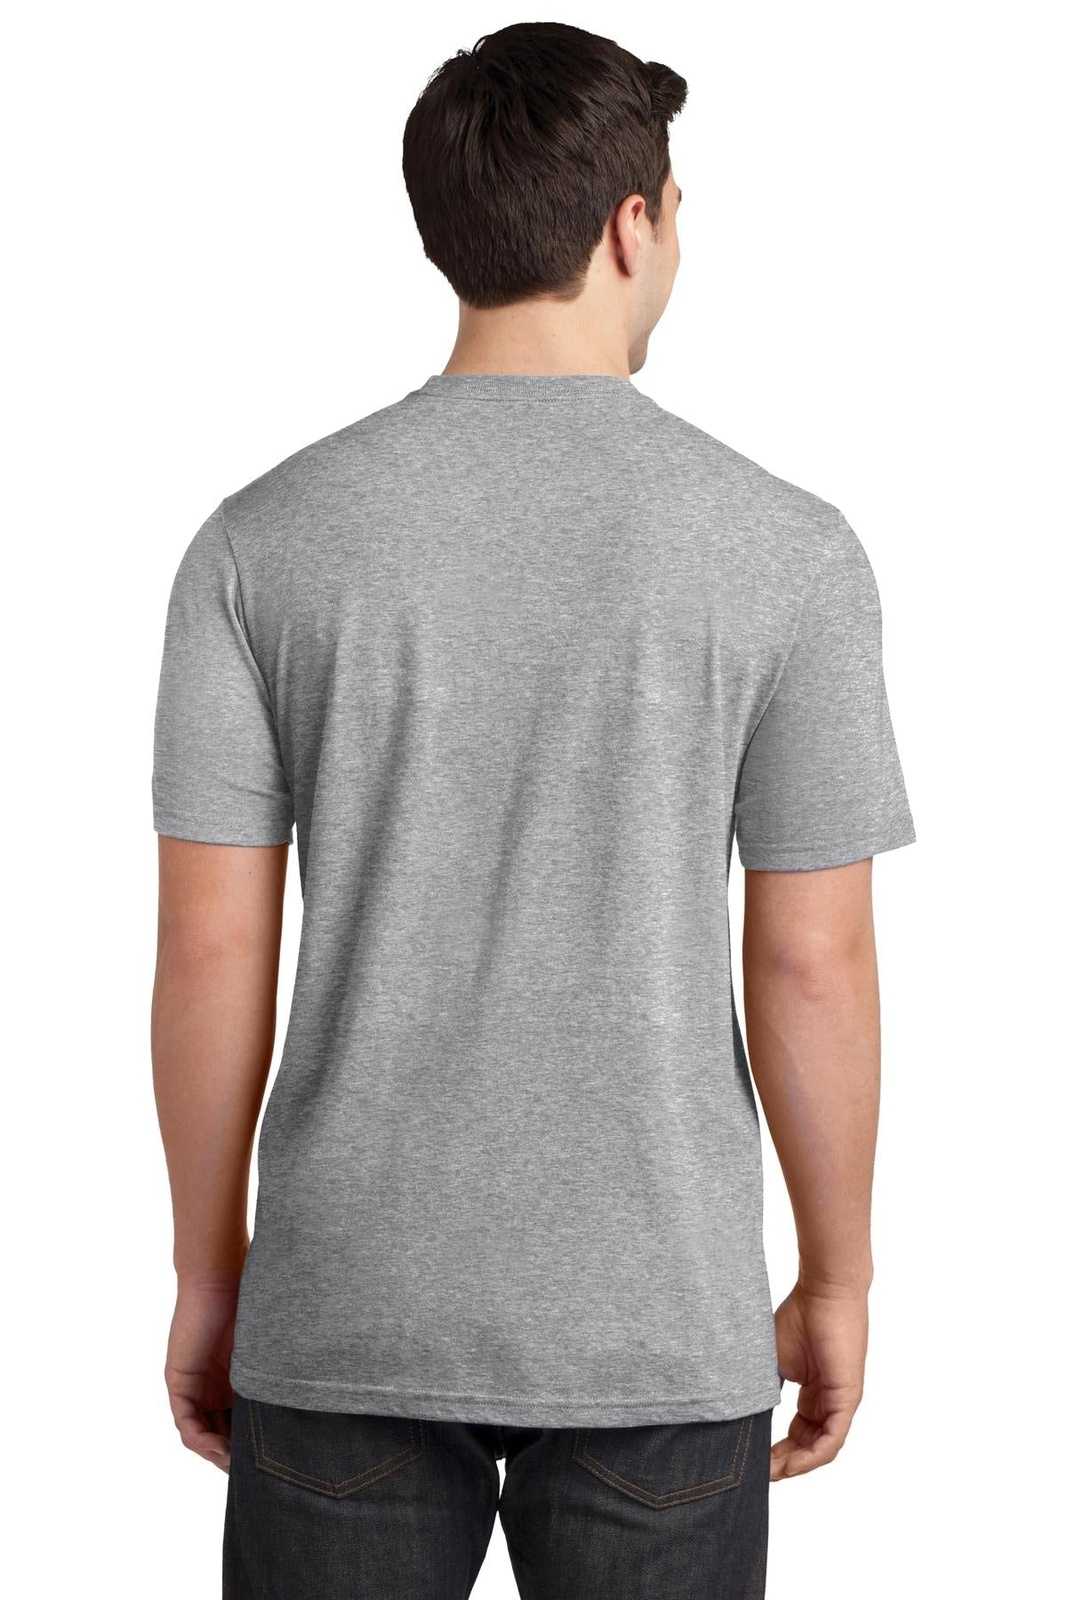 District DT6000P Very Important Tee with Pocket - Light Heather Gray - HIT a Double - 2